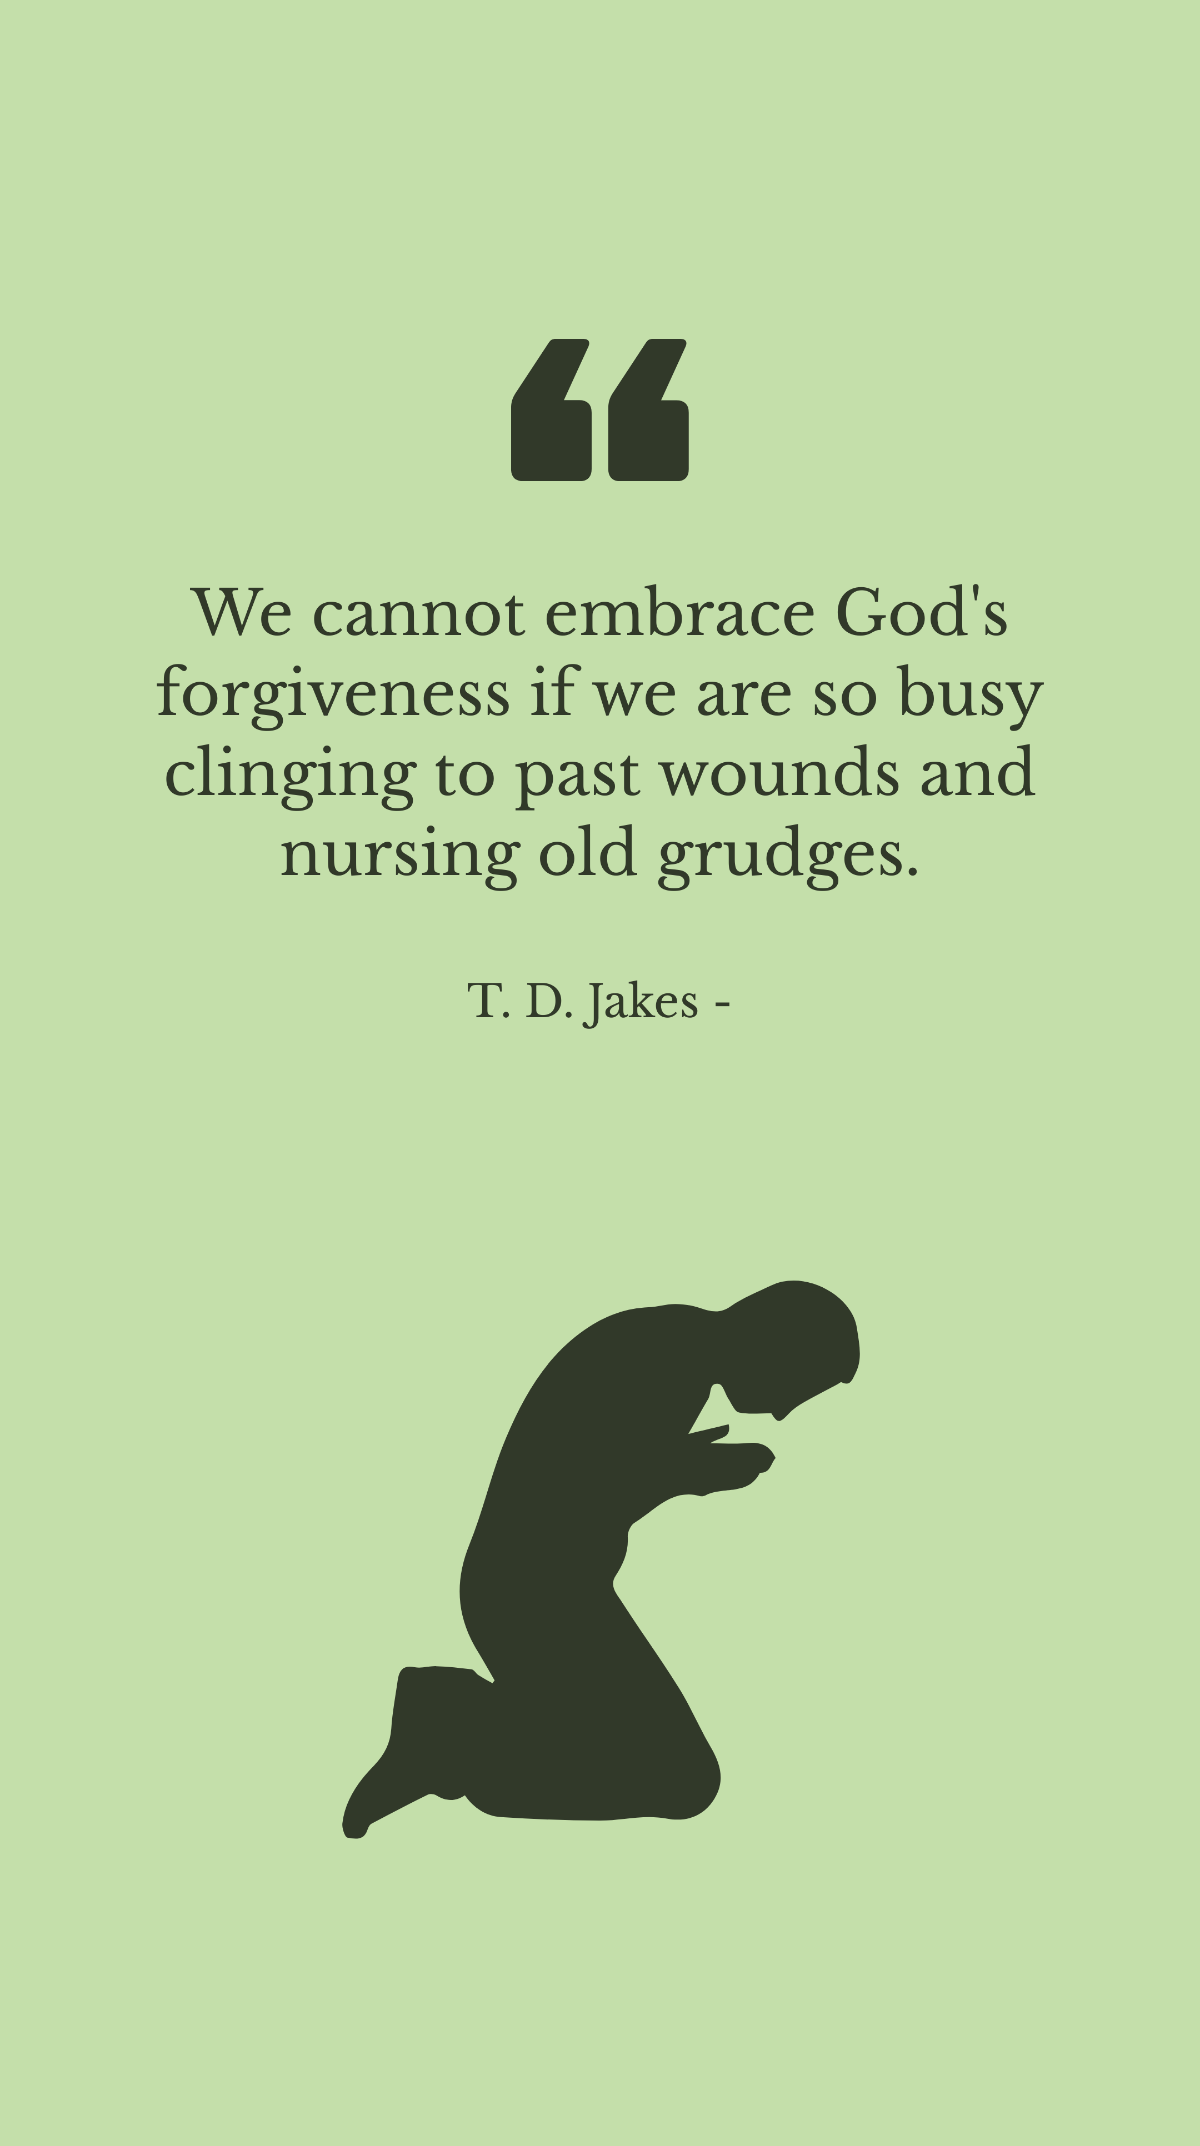 T. D. Jakes - We cannot embrace God's forgiveness if we are so busy clinging to past wounds and nursing old grudges.